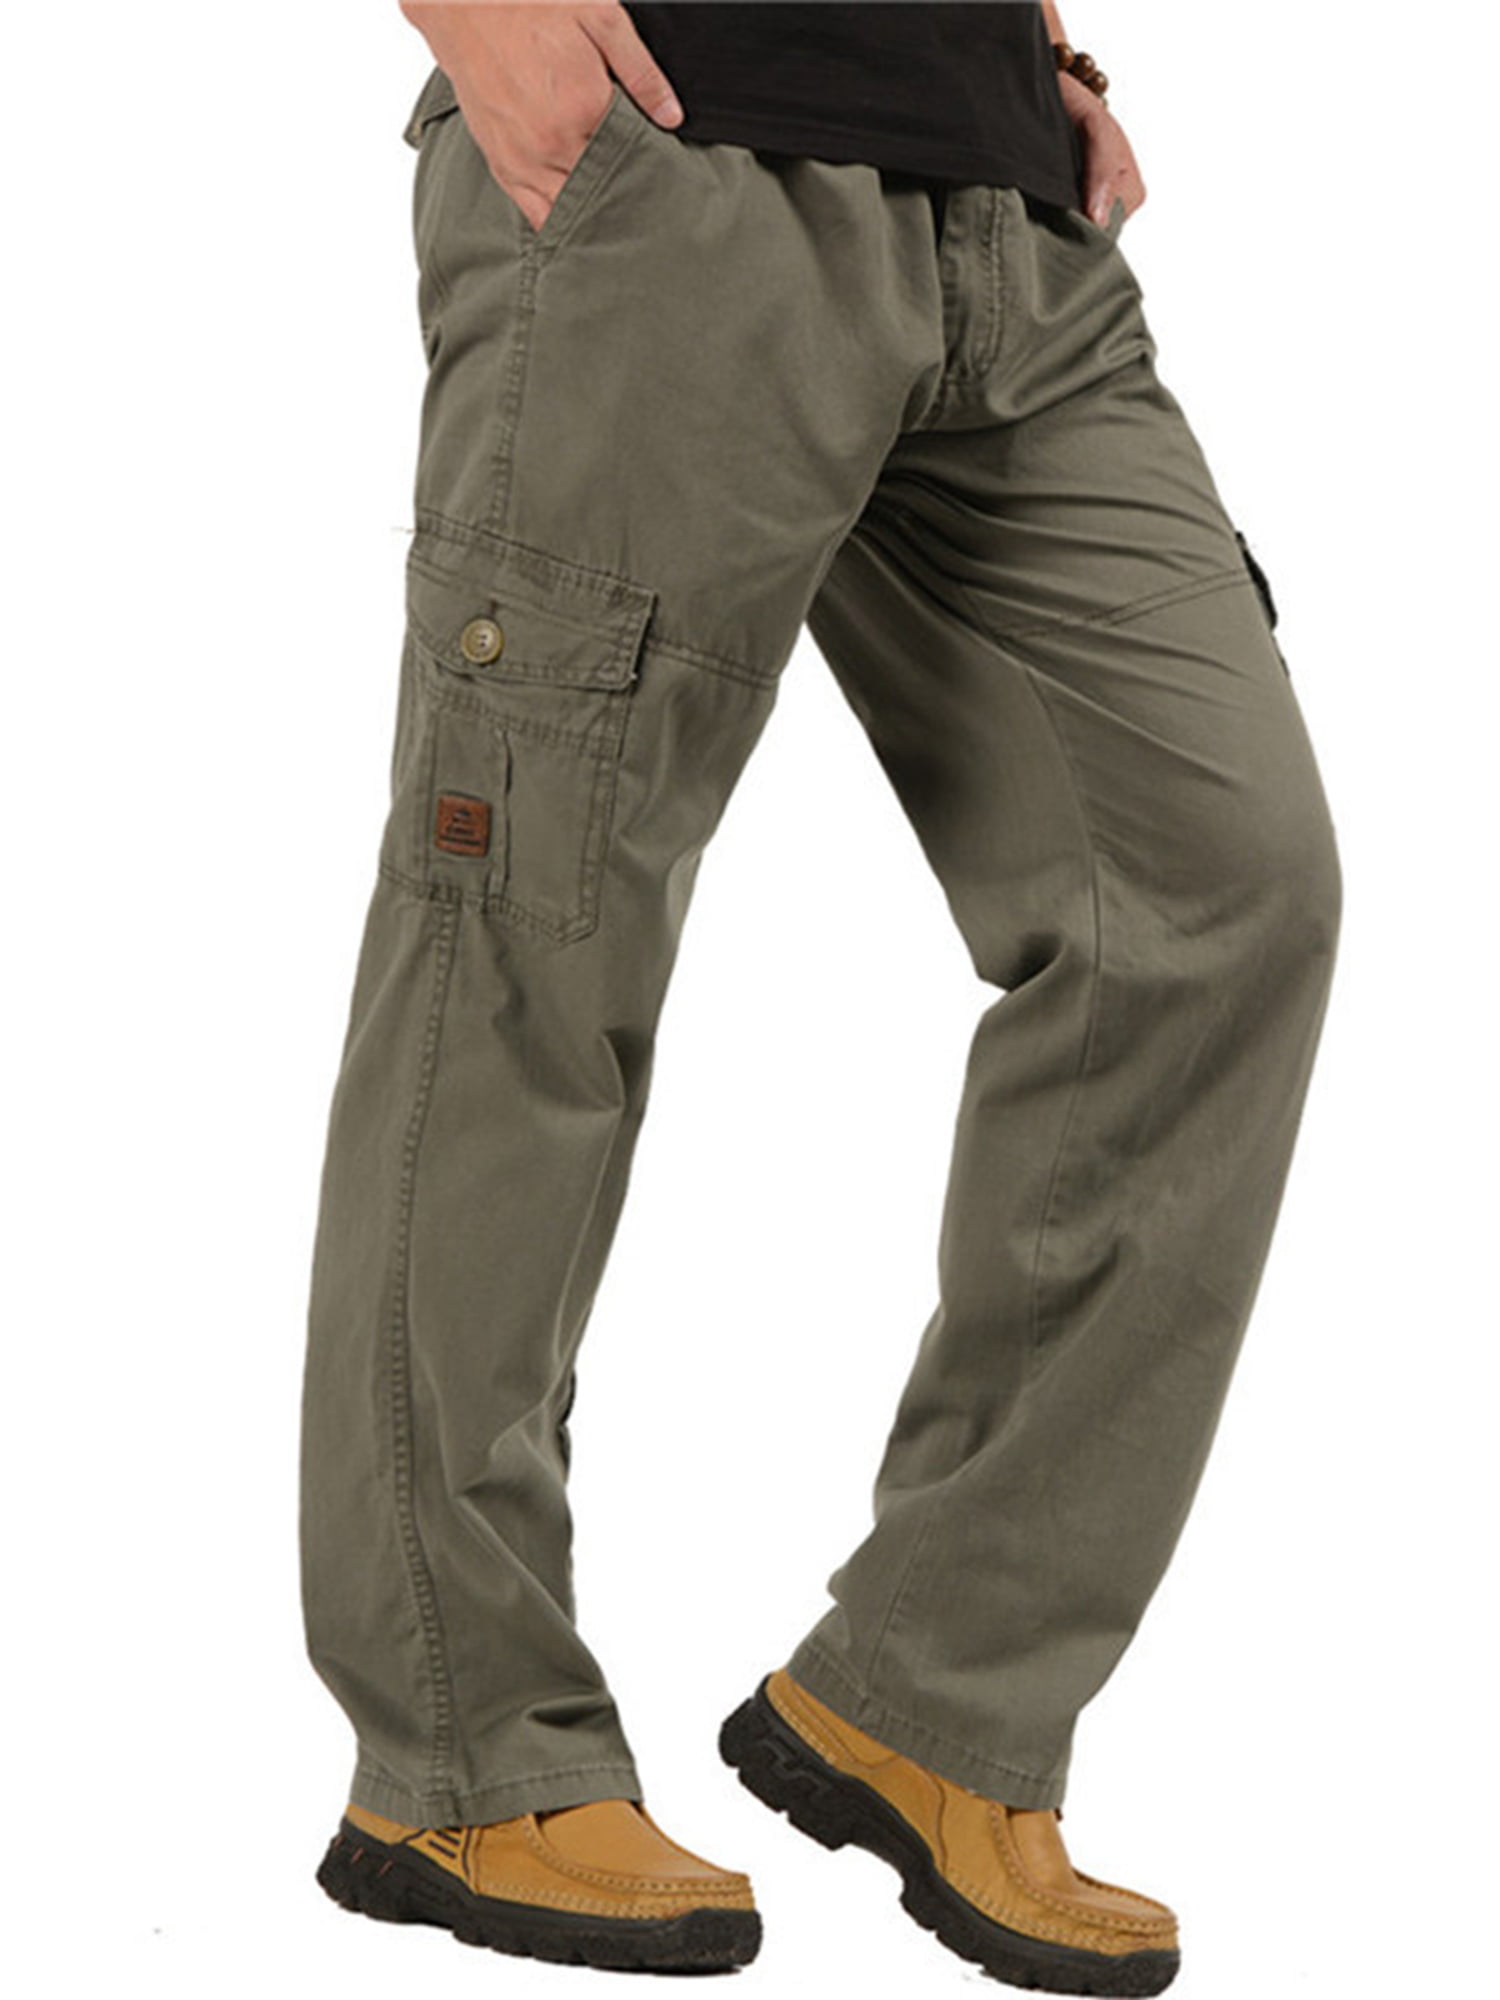 KEFITEVD Mens Quick Dry Tactical Safari Trousers Outdoor Lightweight Thin Hiking Pants with Multi Pockets 